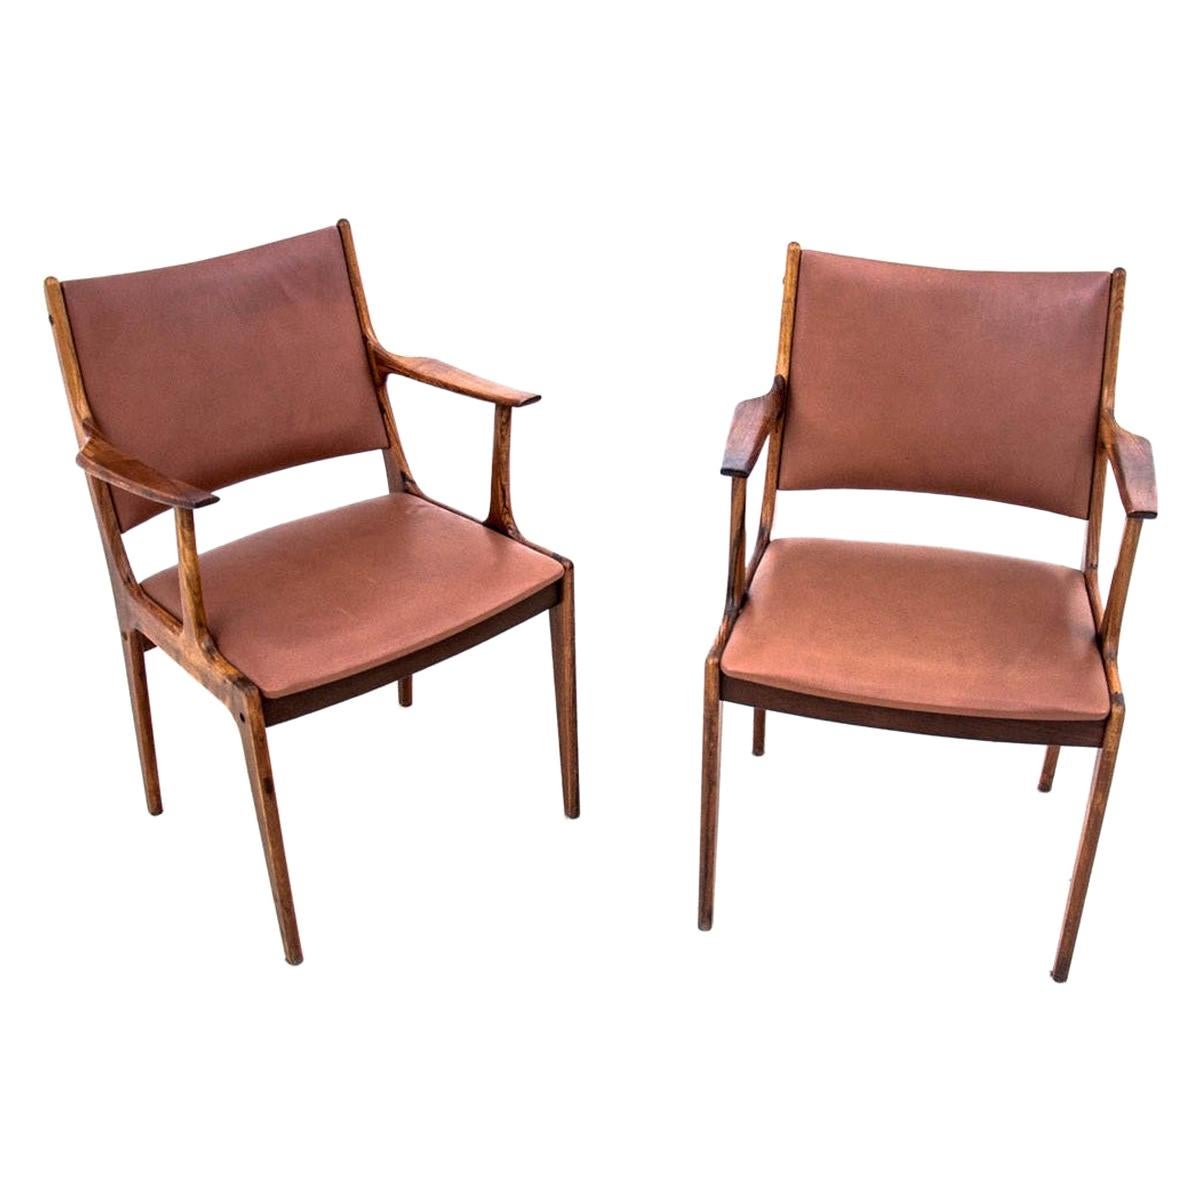 Two Rosewood Armchairs, Denmark, 1960s For Sale